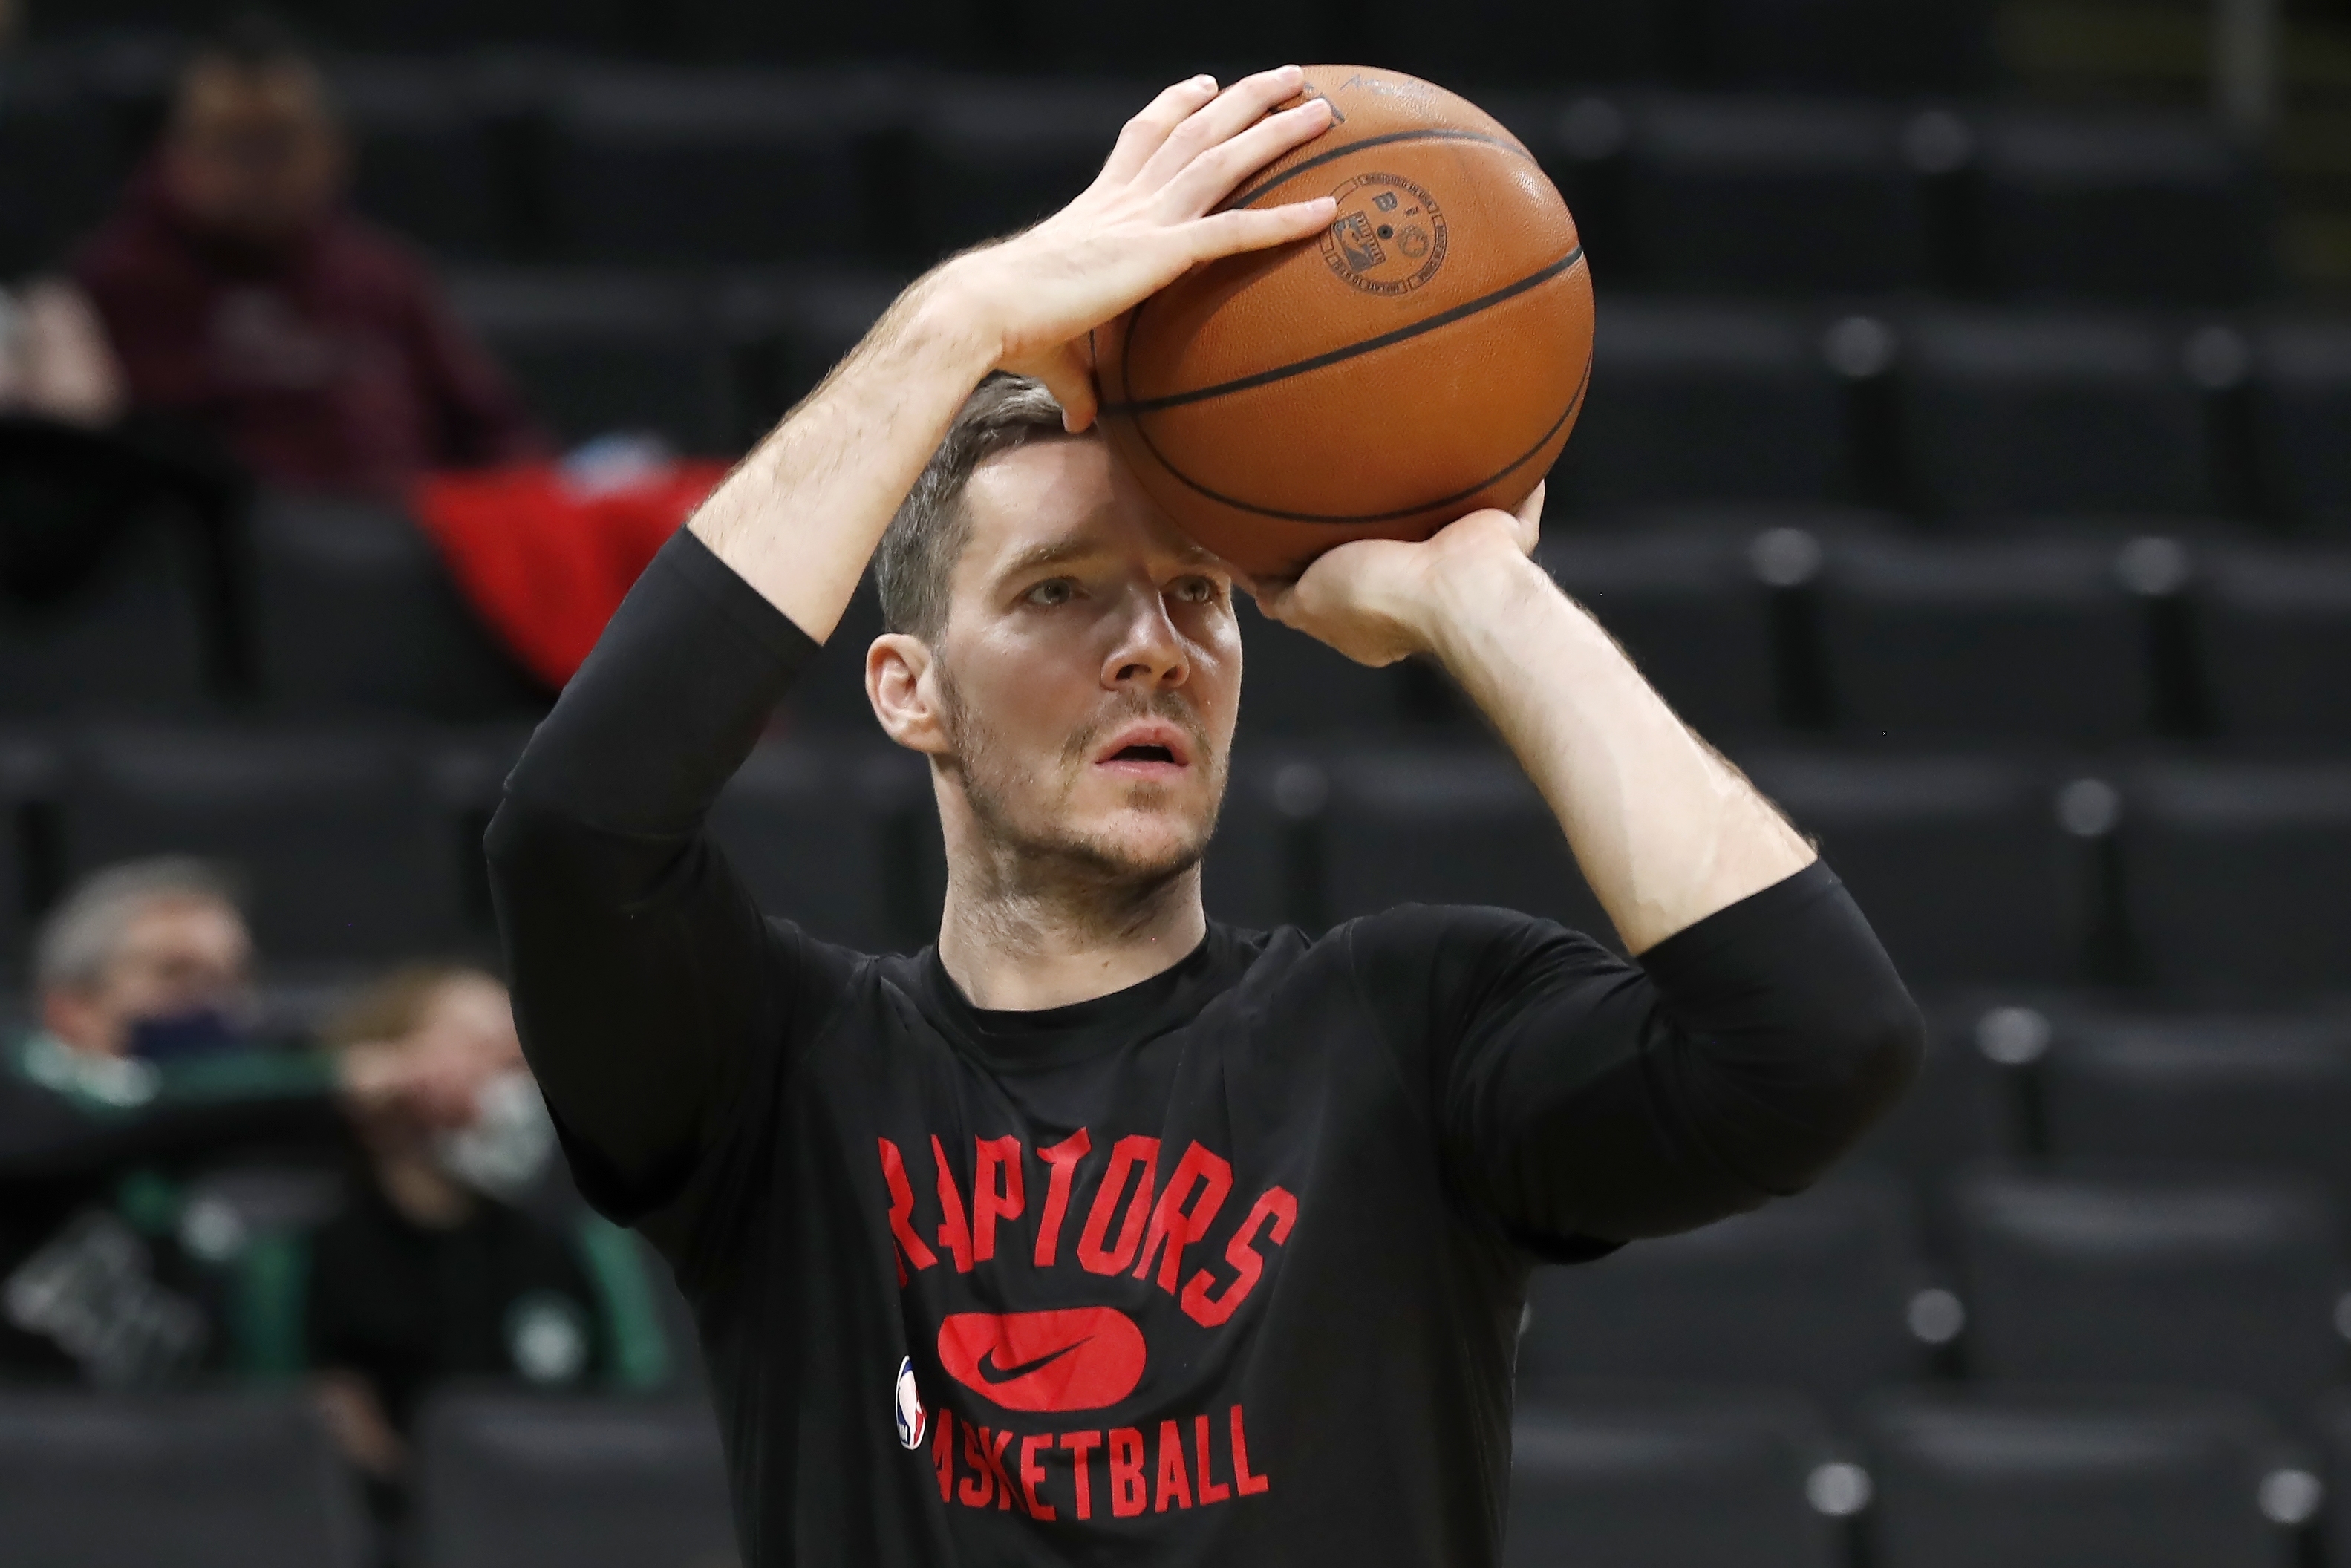 NBA Rumors: Goran Dragic to Sign with Nets After Contract Buyout